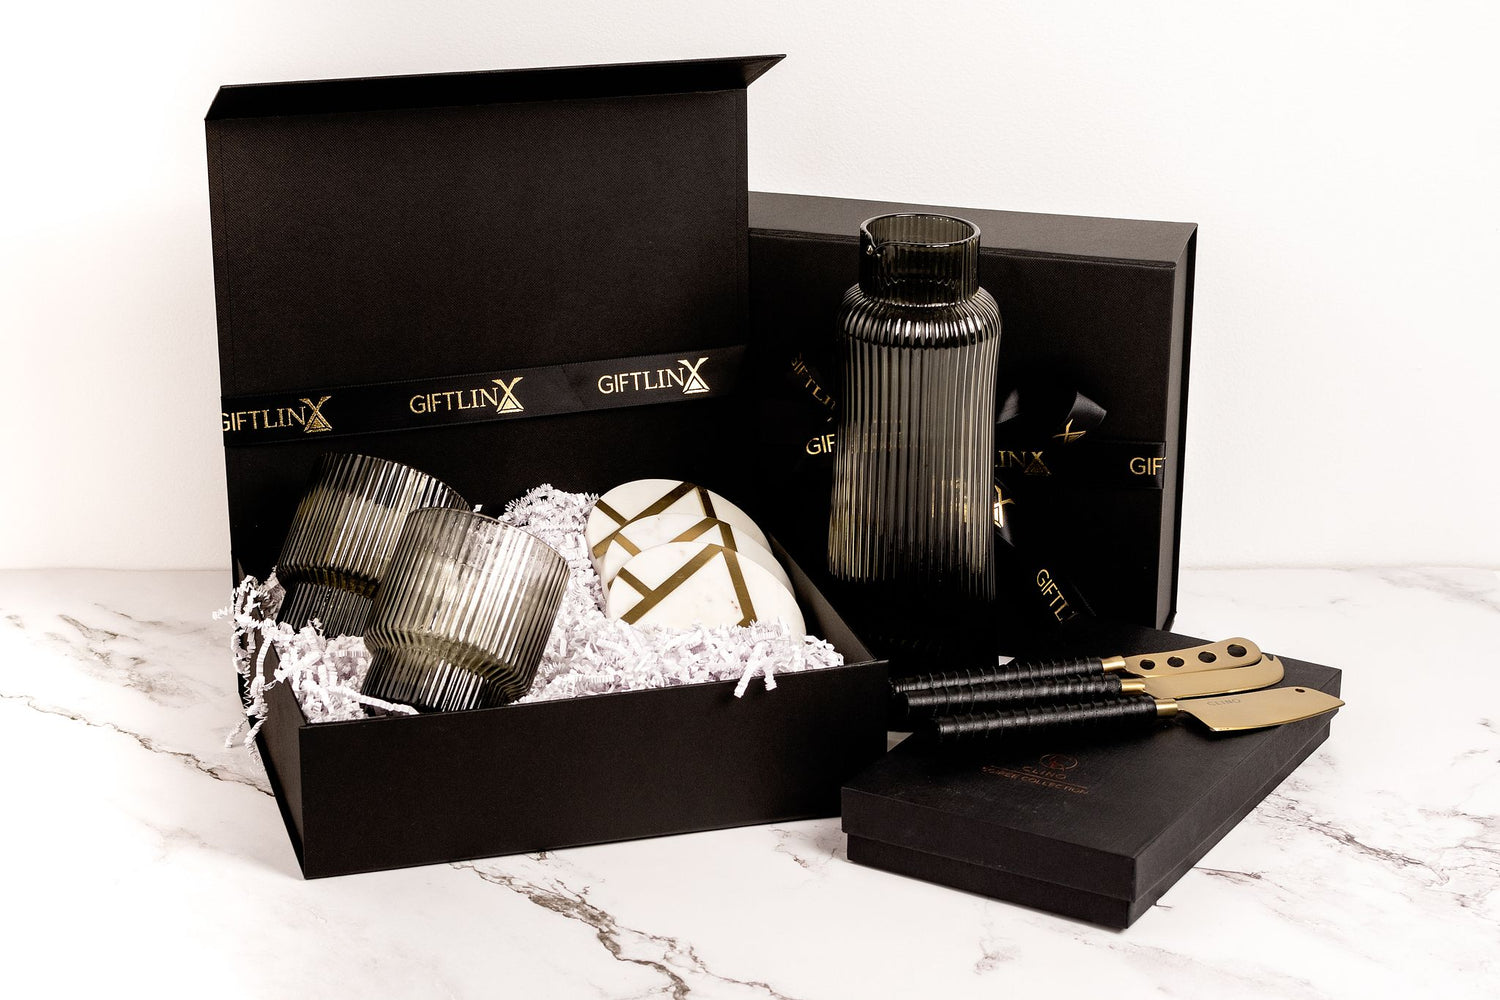 black gift box housing brass and marble coasters and ribbed glass tumblers. A ribbed glass carafe stand next to it